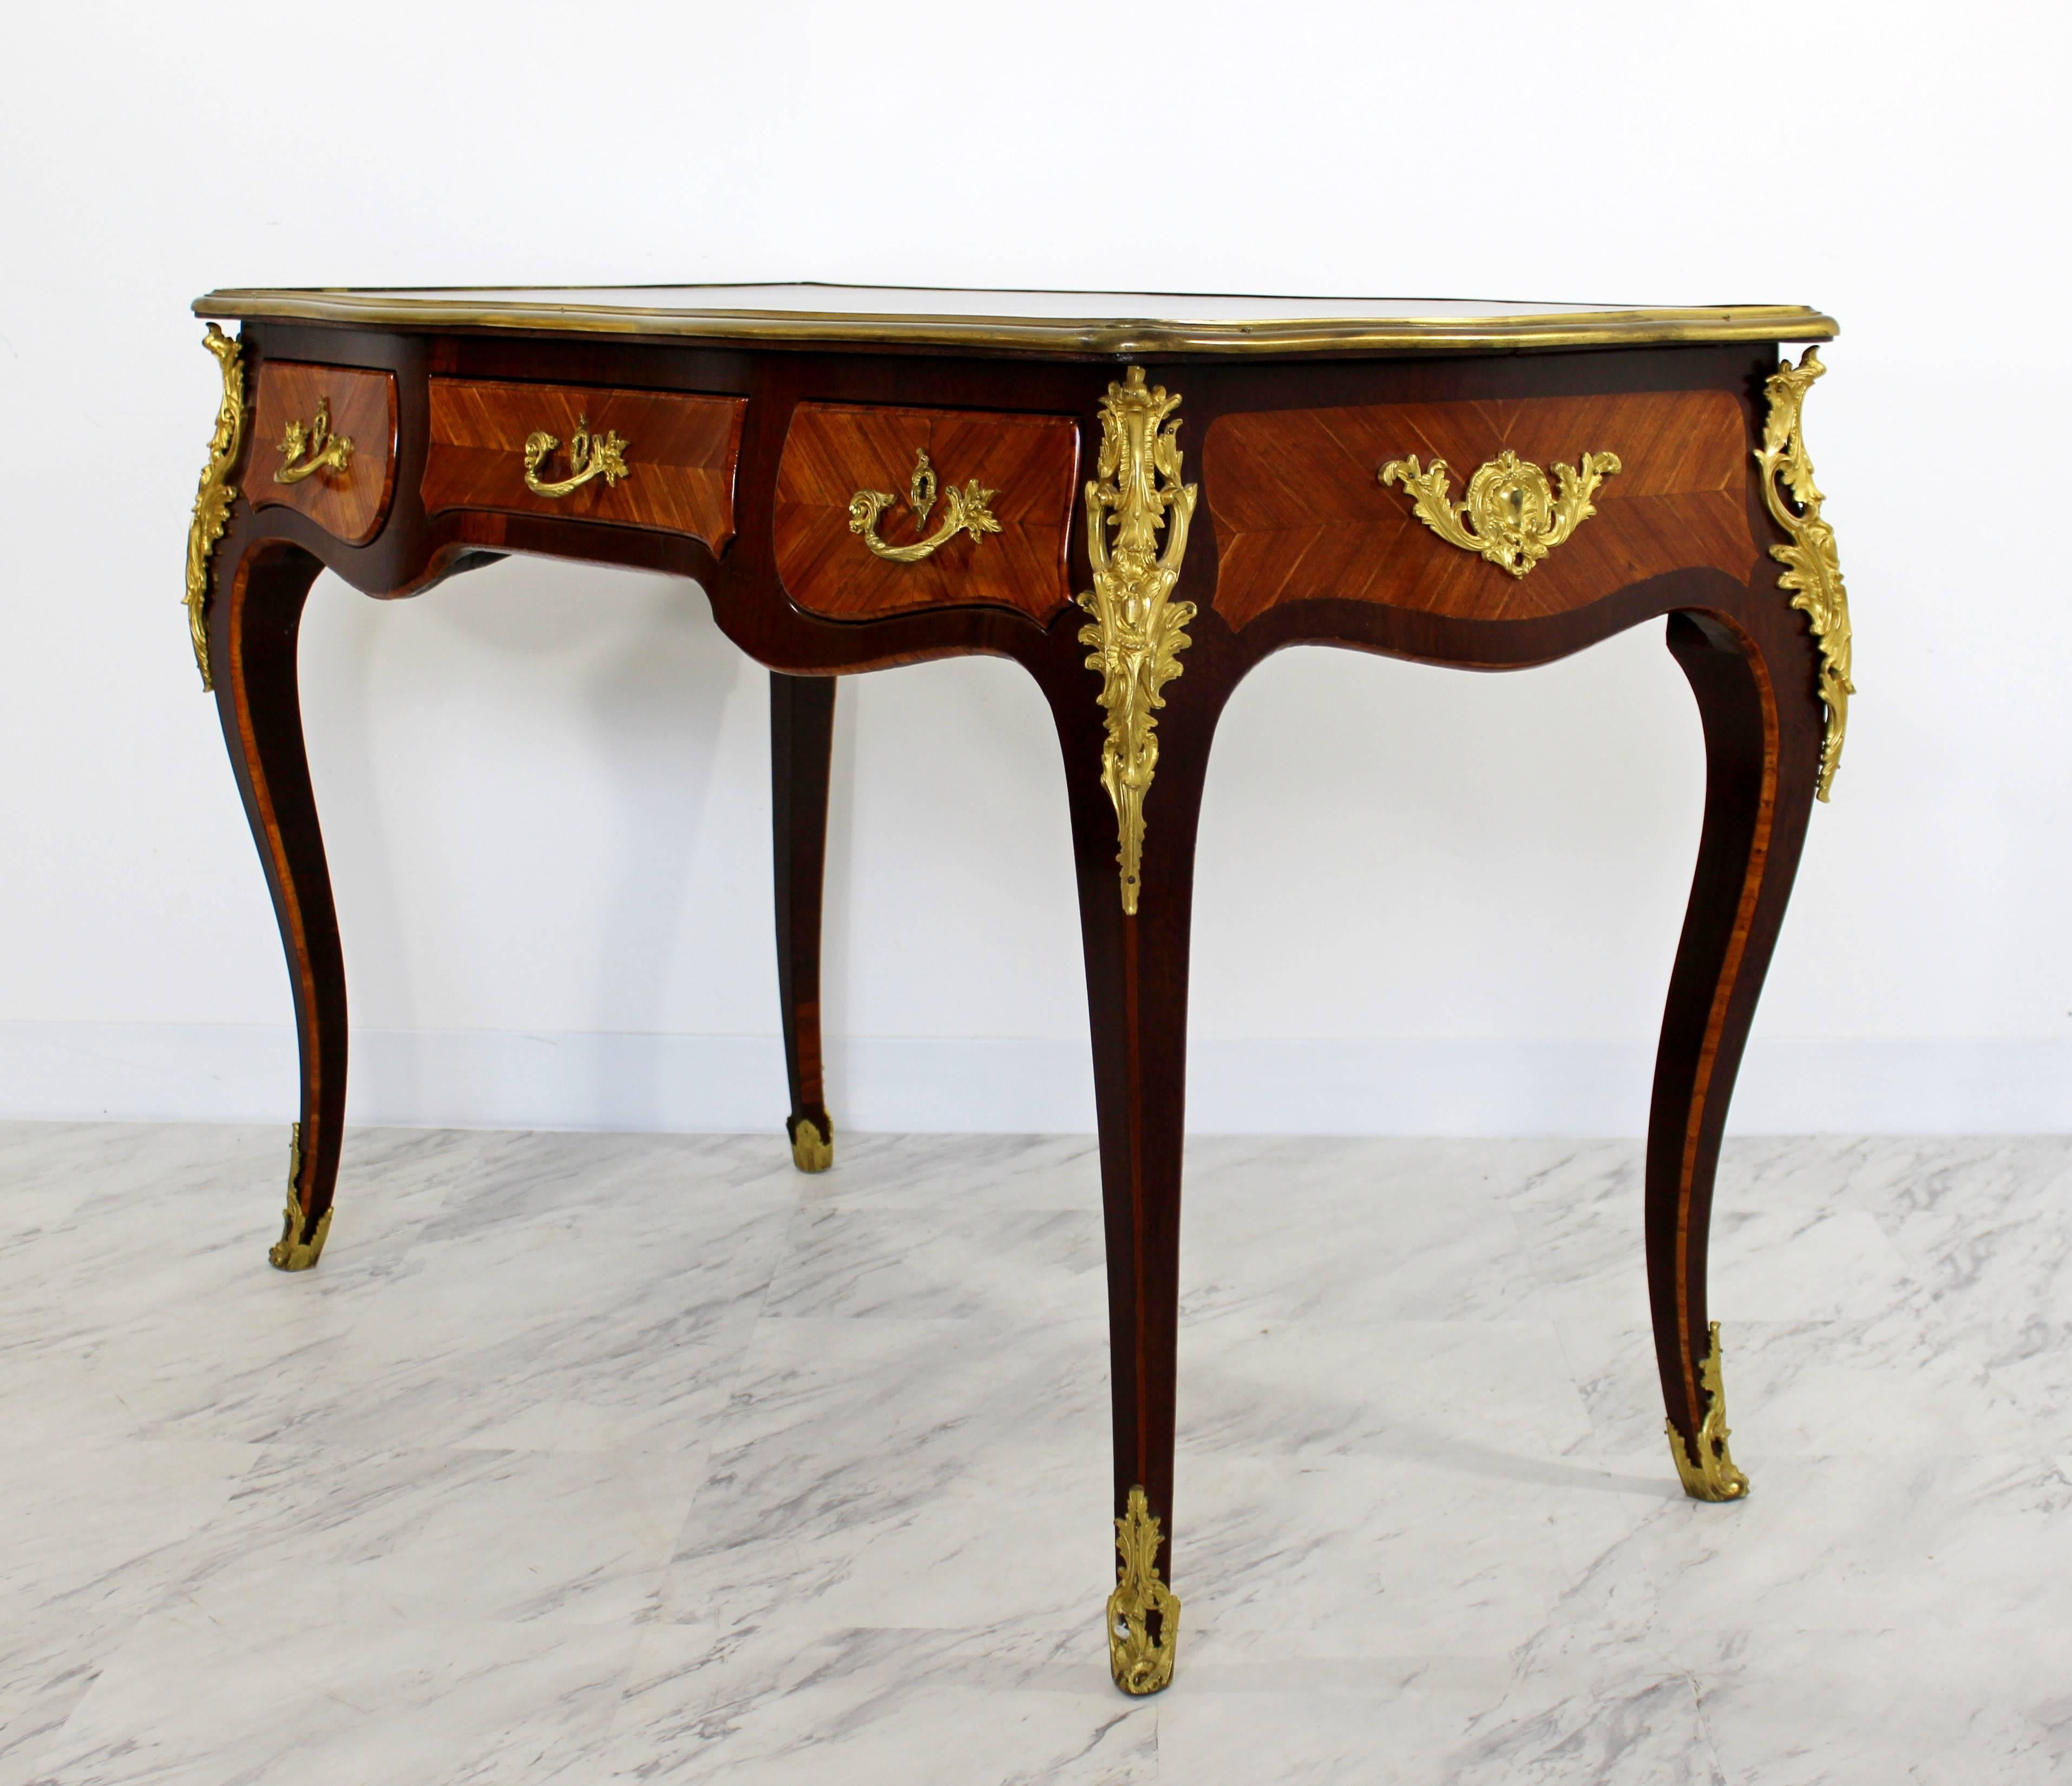 For your consideration is a magnificent, 20th century writing desk, made of mahogany with bronze ormolu. In excellent condition. The dimensions are 46" W x 24" (2') D x 30" H.